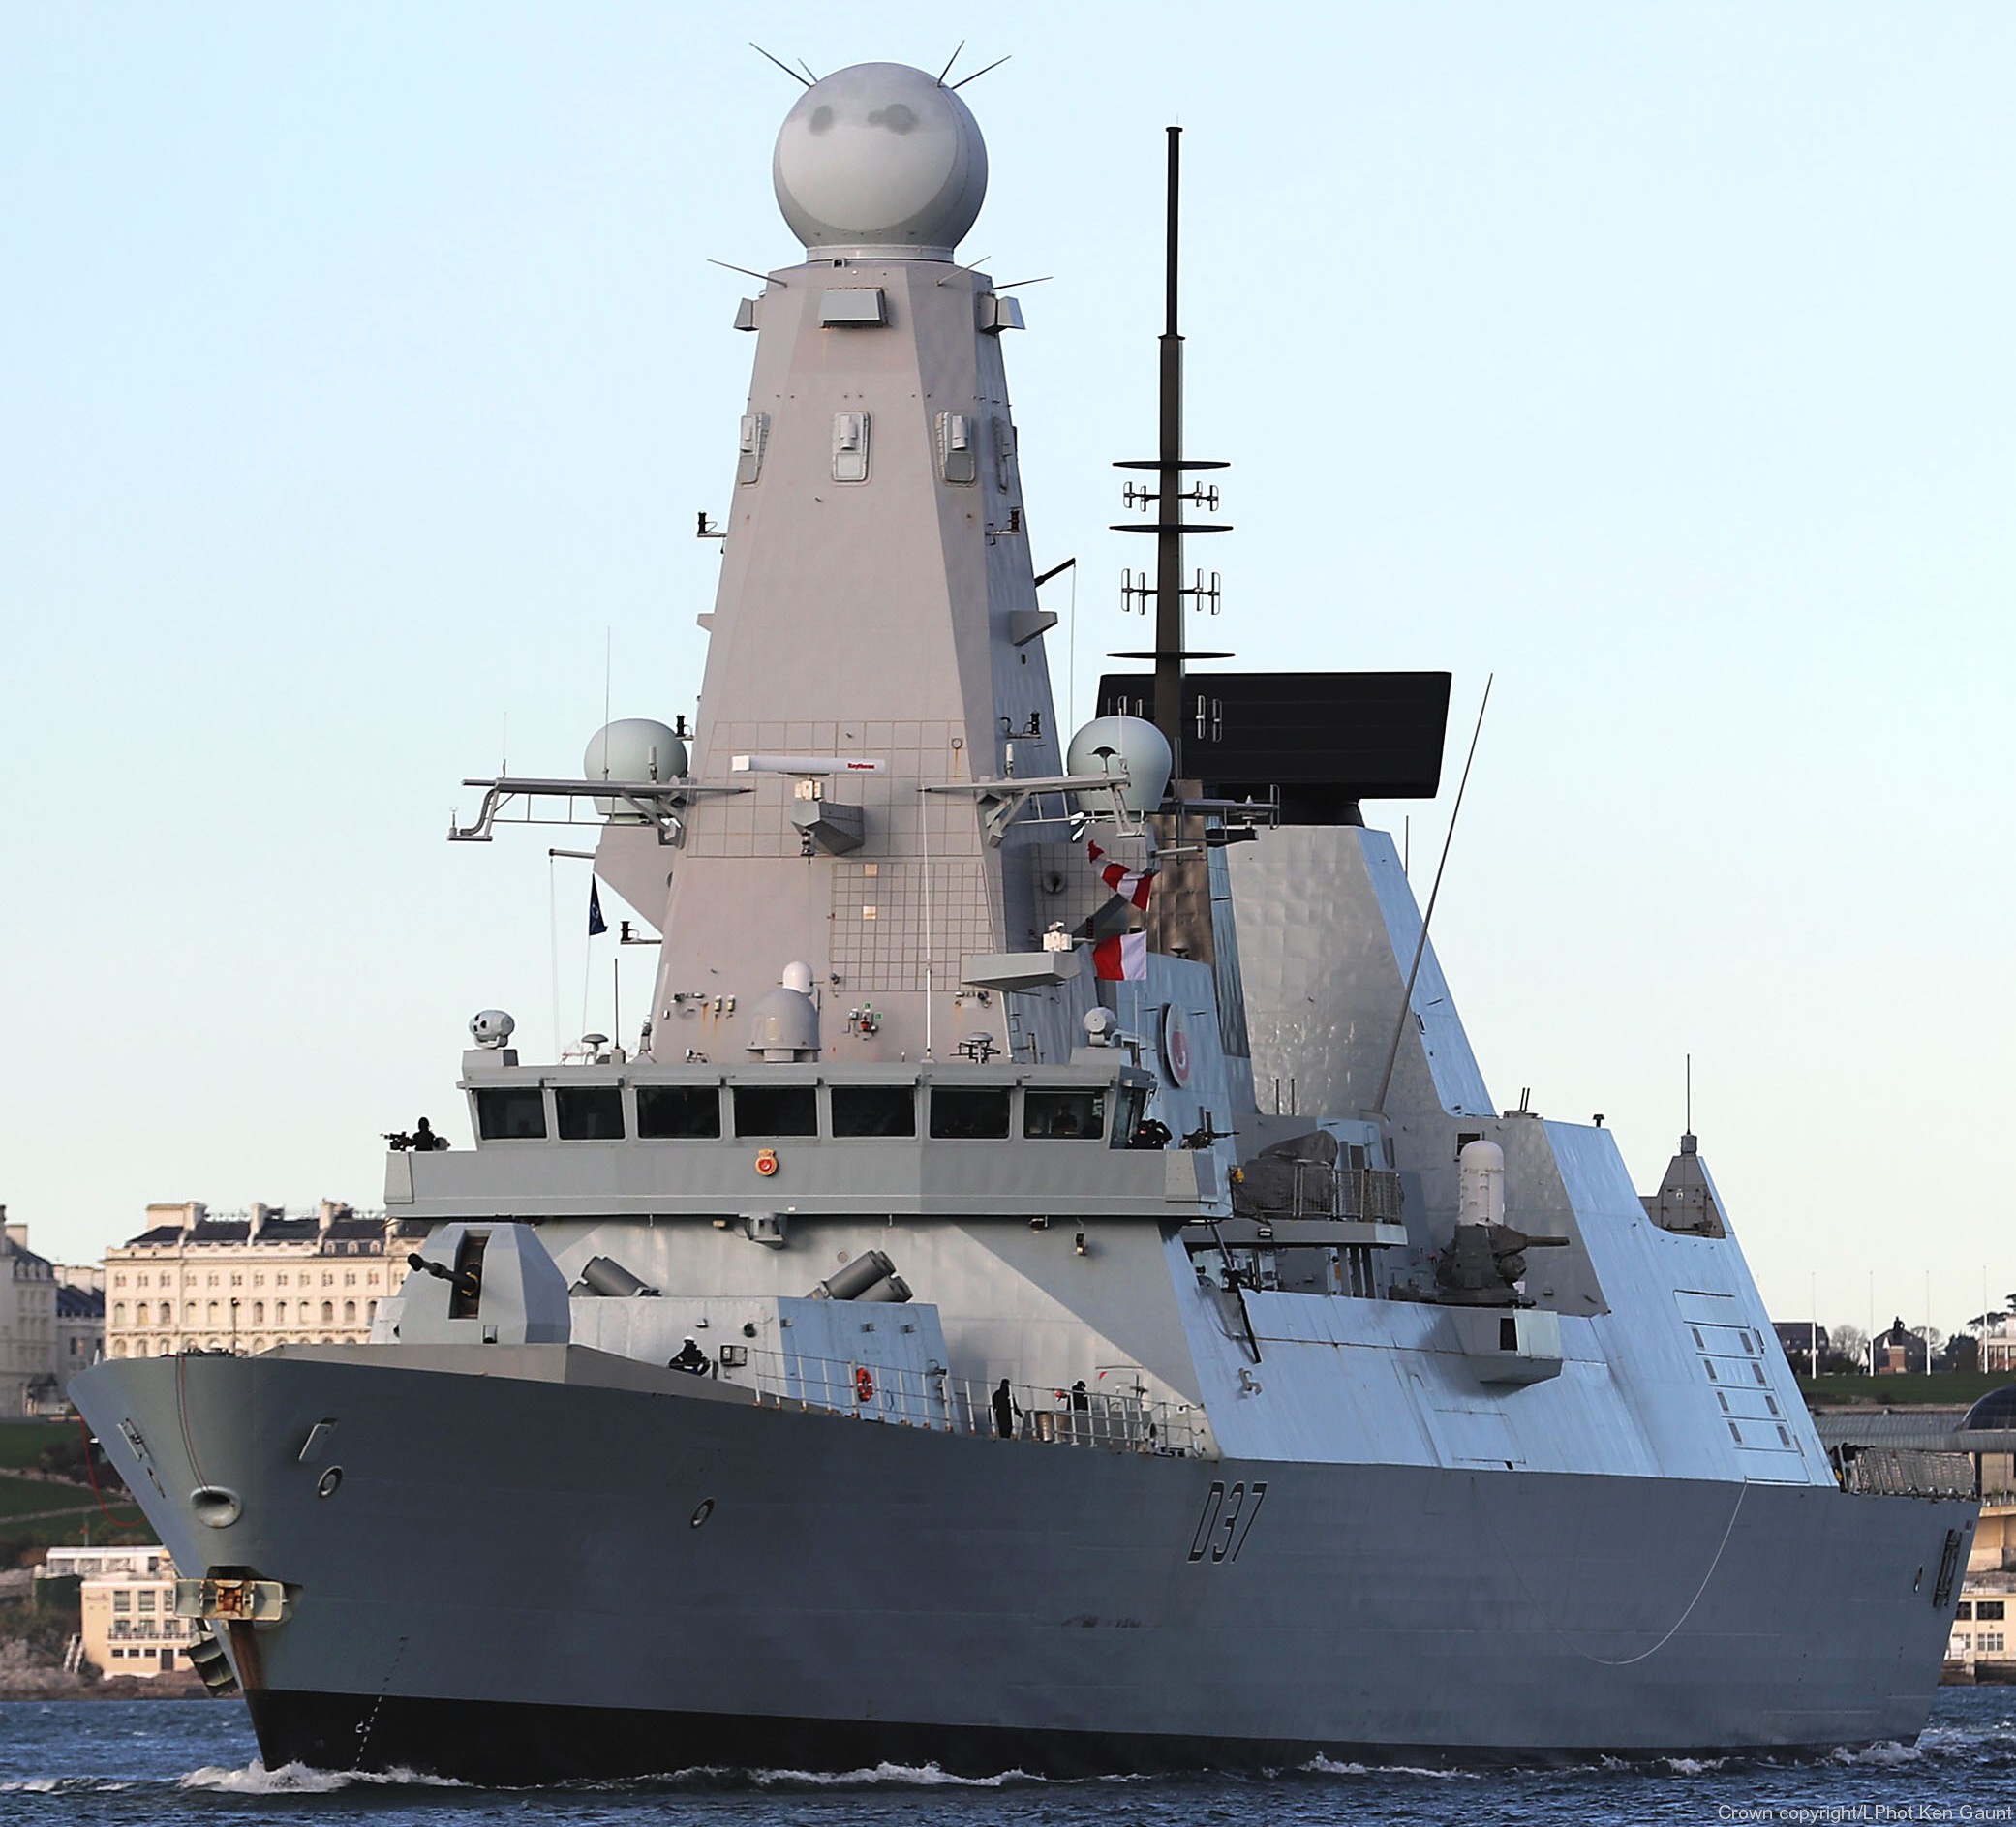 d37 hms duncan d-37 type 45 daring class guided missile destroyer ddg royal navy sea viper 51